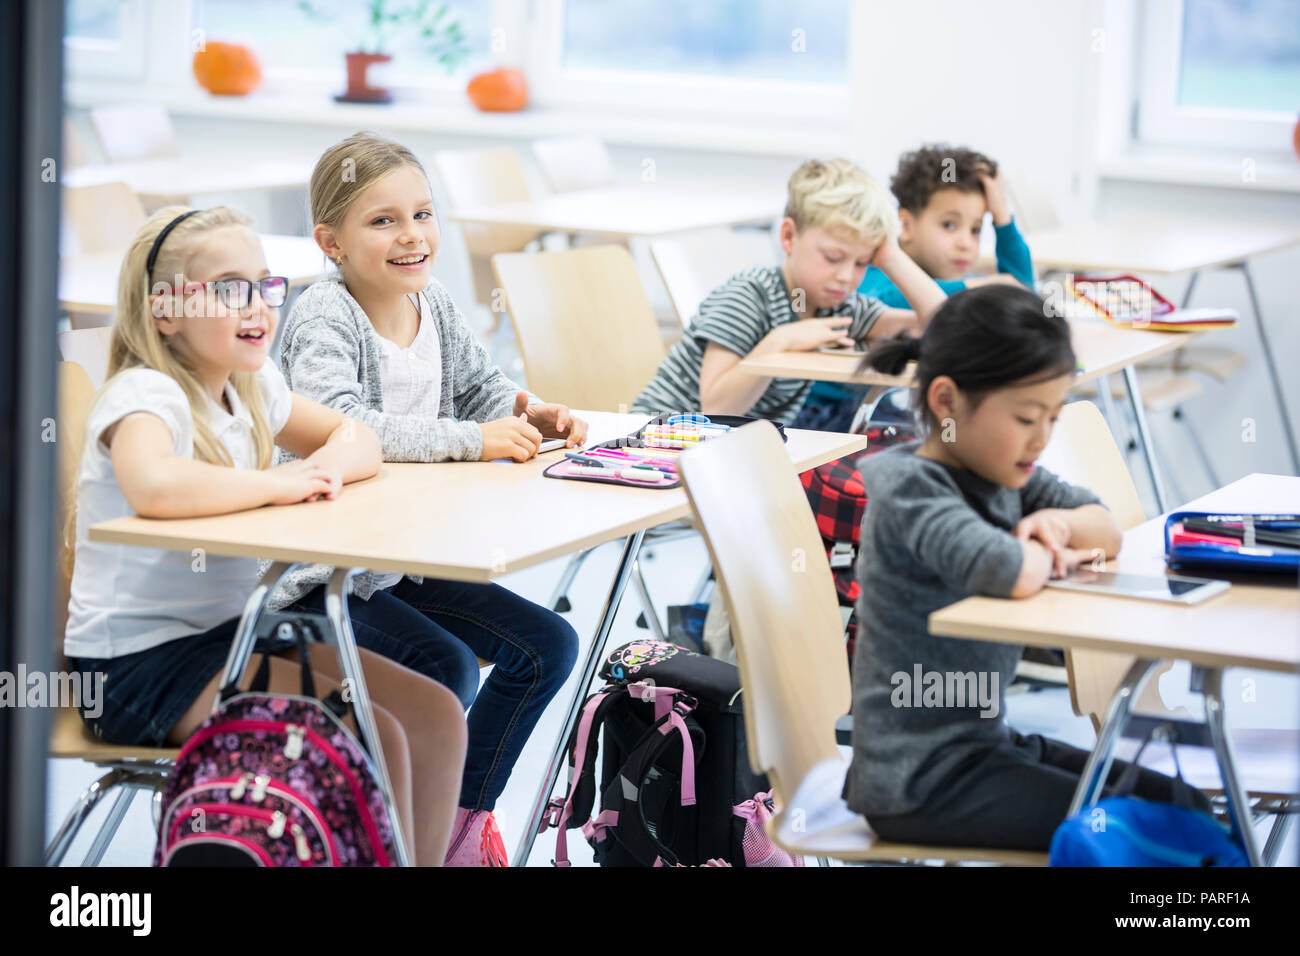 Pupils sitting at desks in class Stock Photo